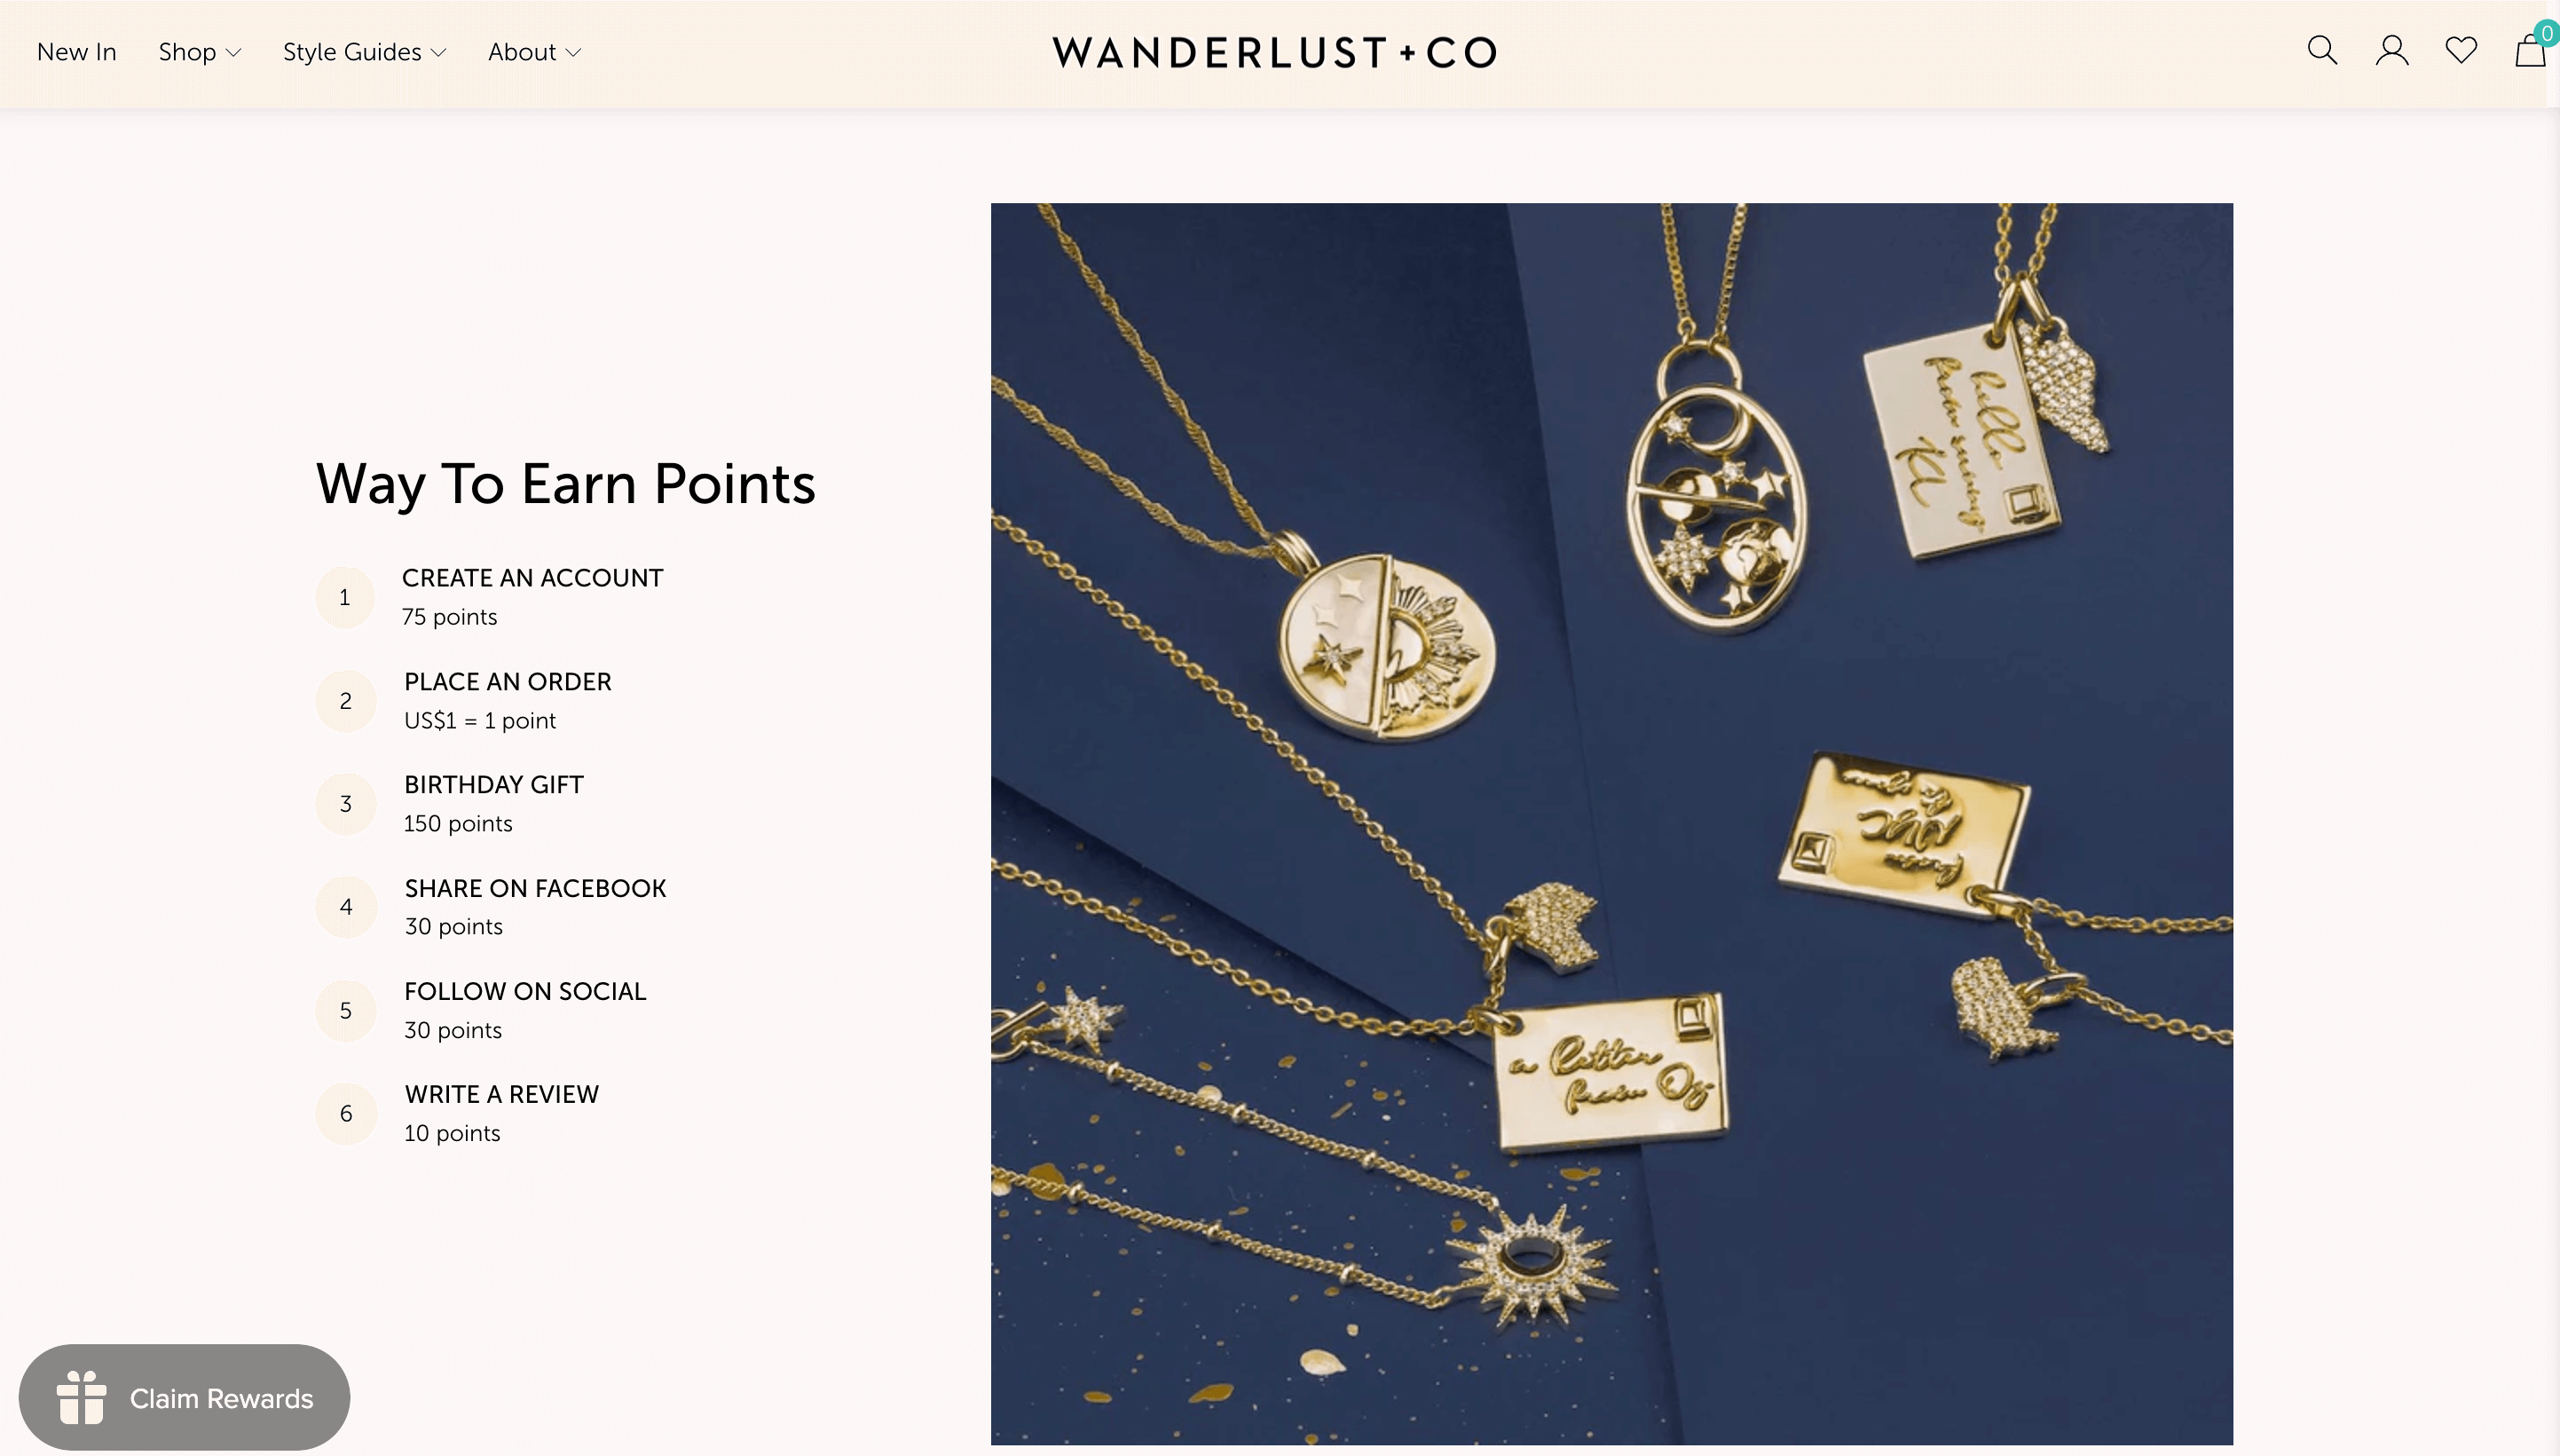 A screenshot from Wanderlust + Co’s rewards program explainer page showing the 6 ways to earn points including creating an account, making purchases, celebrating a birthday, sharing on social media, or writing reviews.